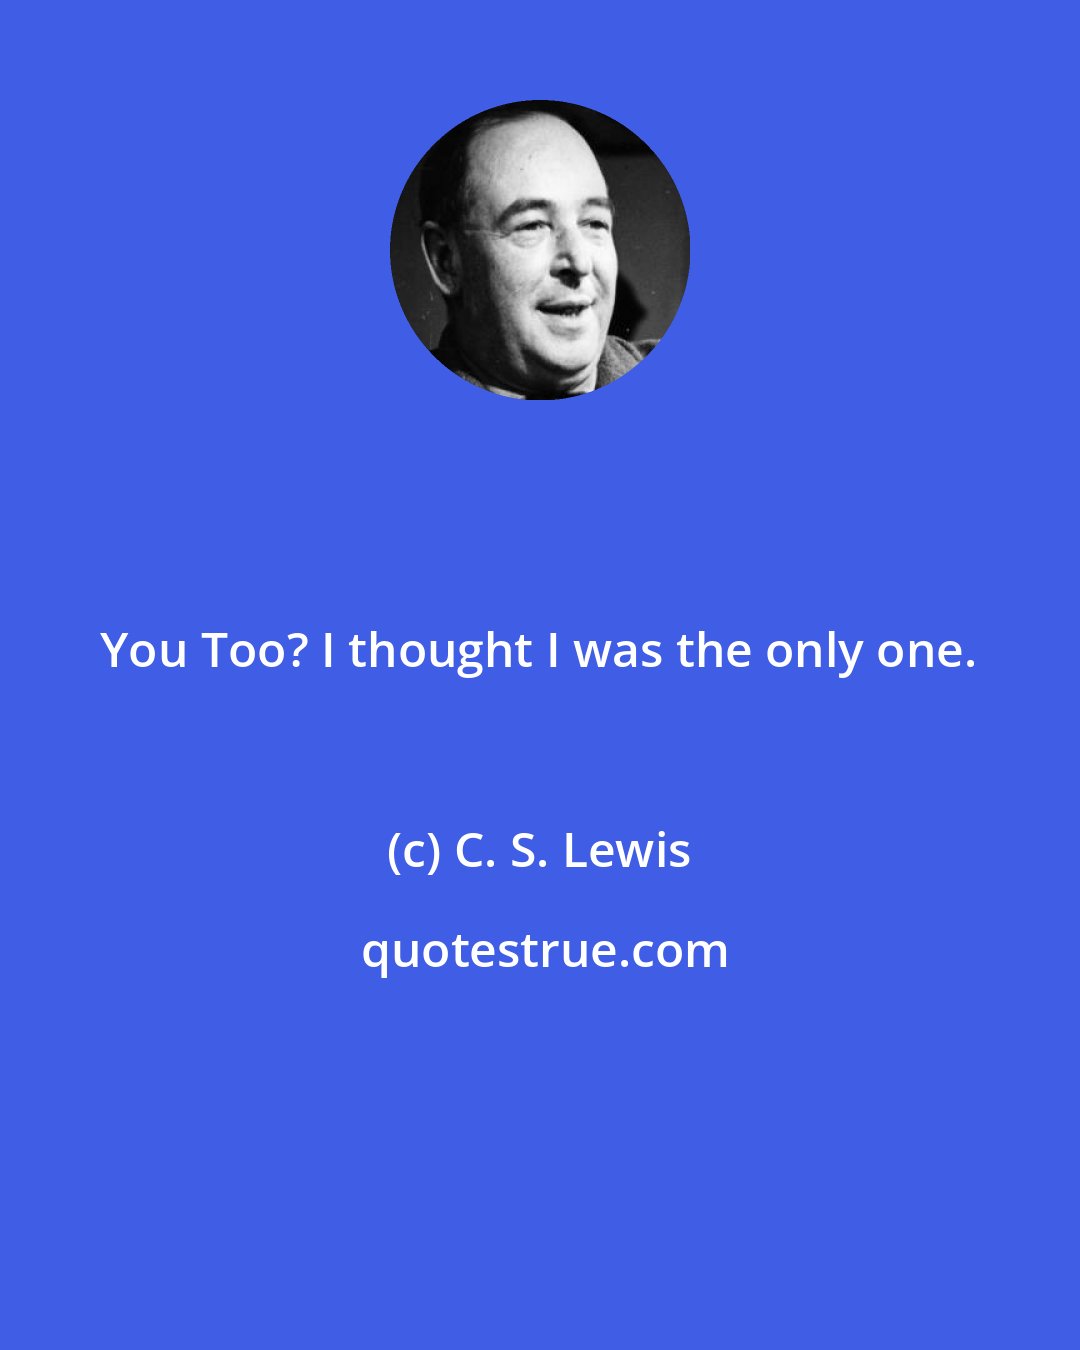 C. S. Lewis: You Too? I thought I was the only one.